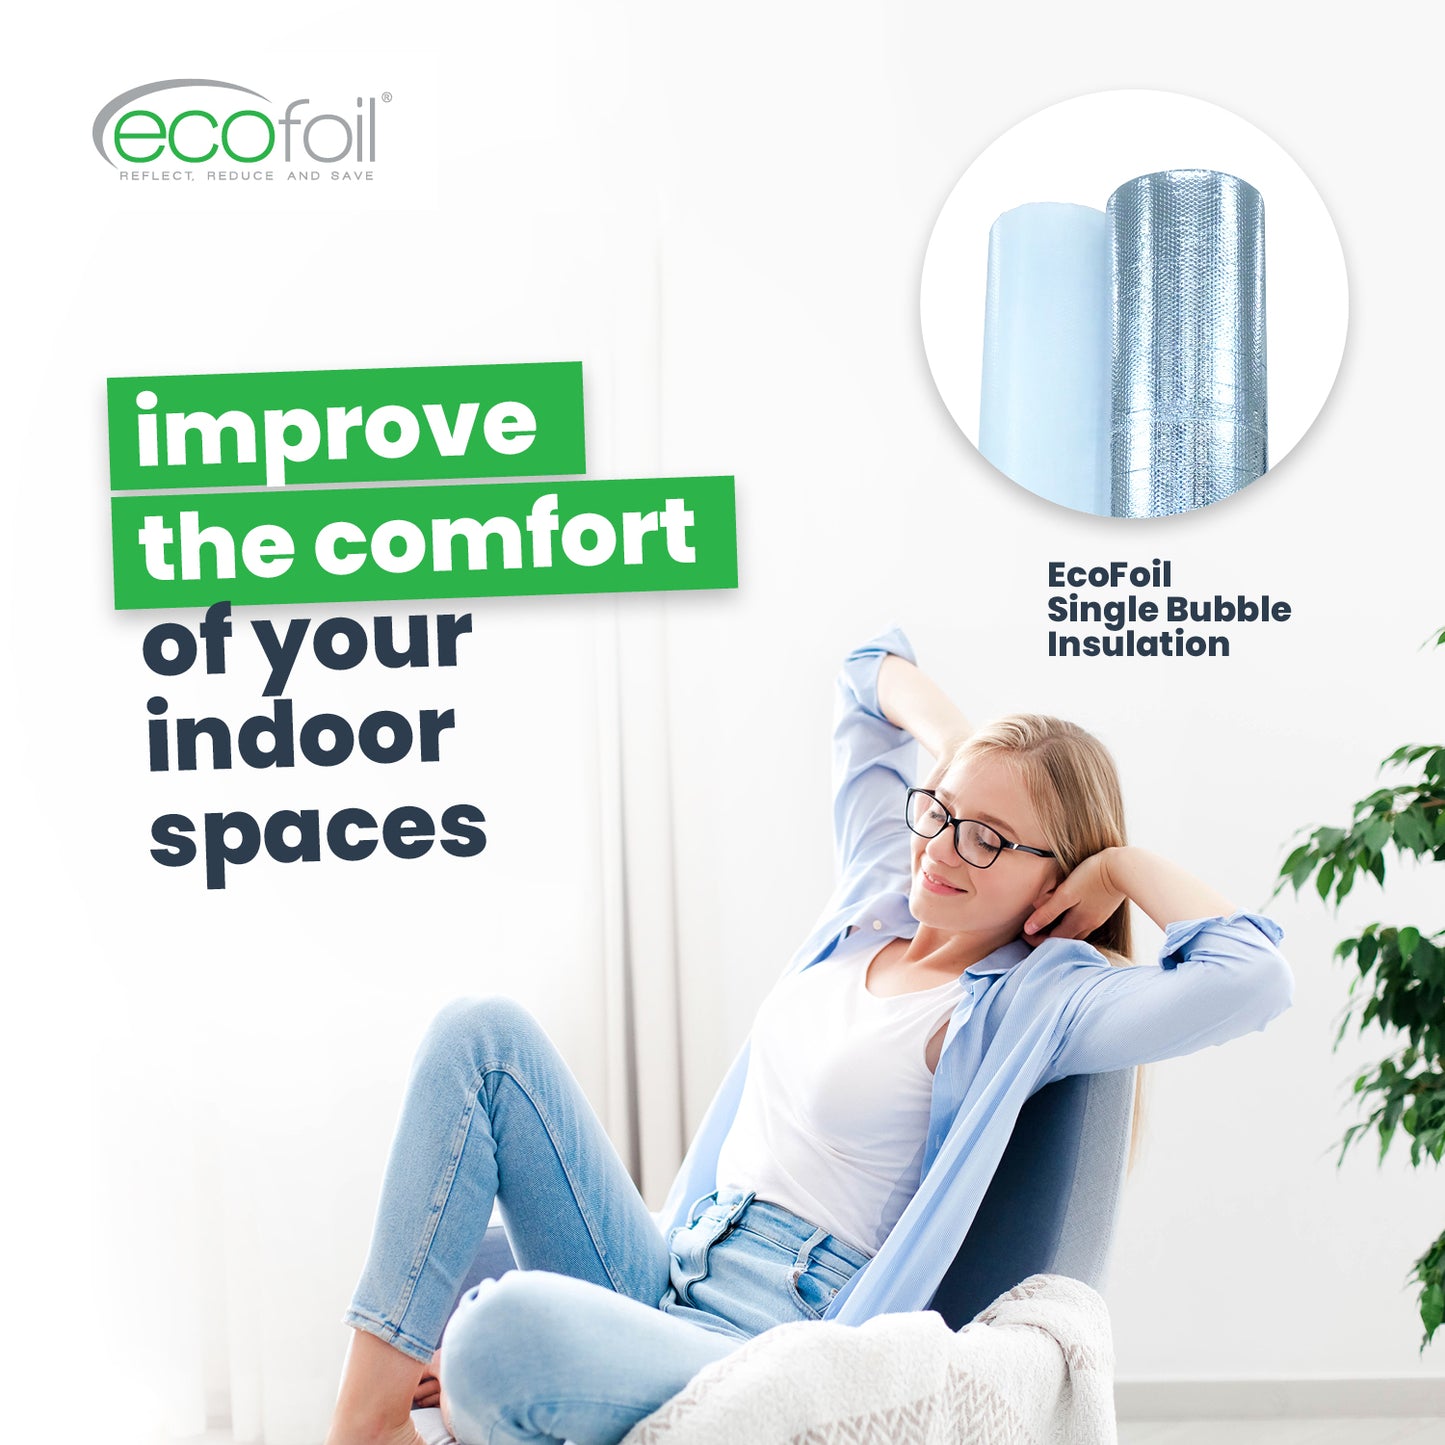 improve the comfort of indoor spaces with ecofoil single bubble reflective insulation